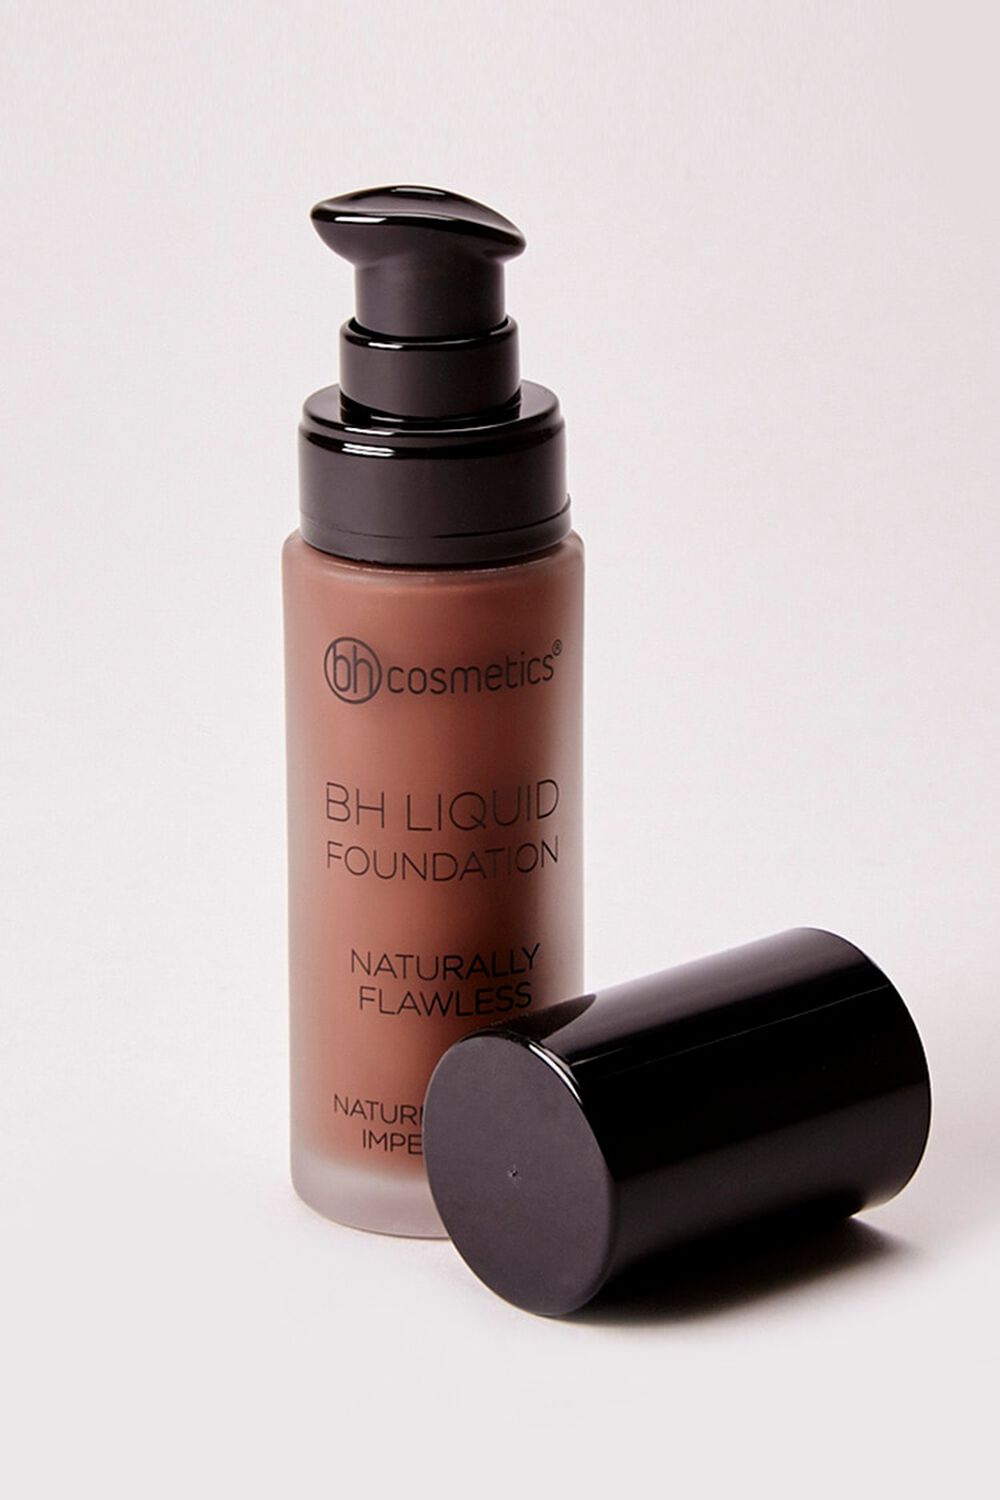 BH Liquid Foundation – Naturally Flawless, image 1